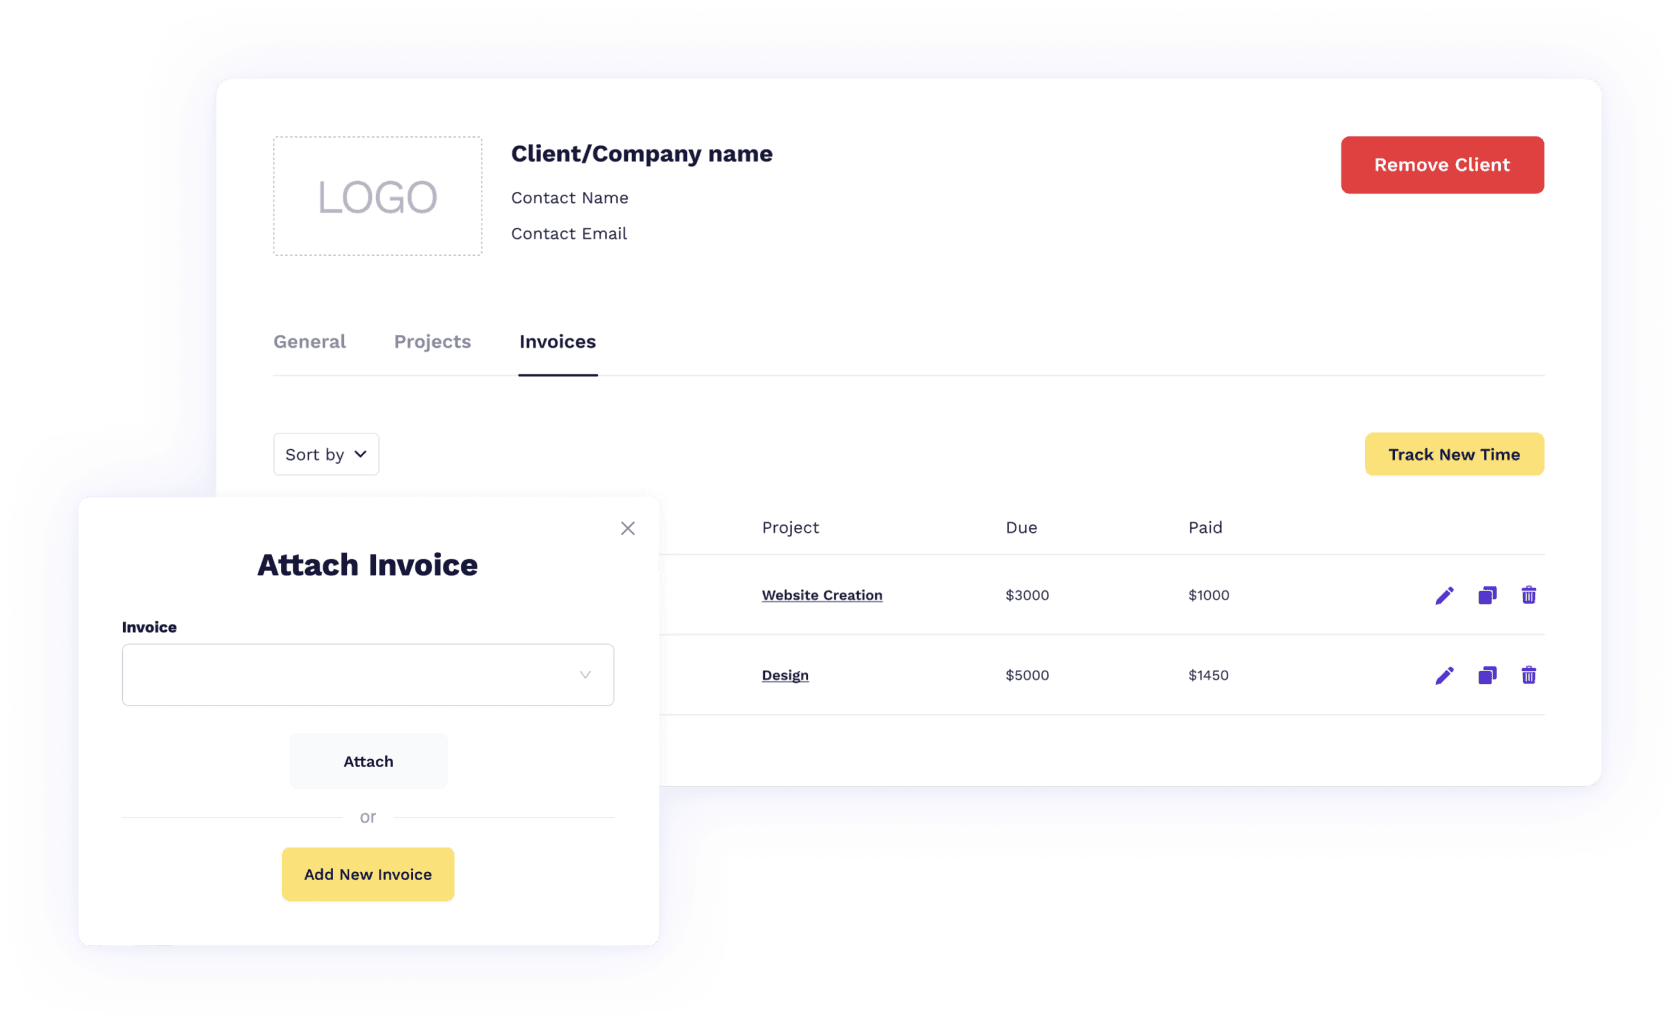 Keep track of clients’ invoices - Owledge